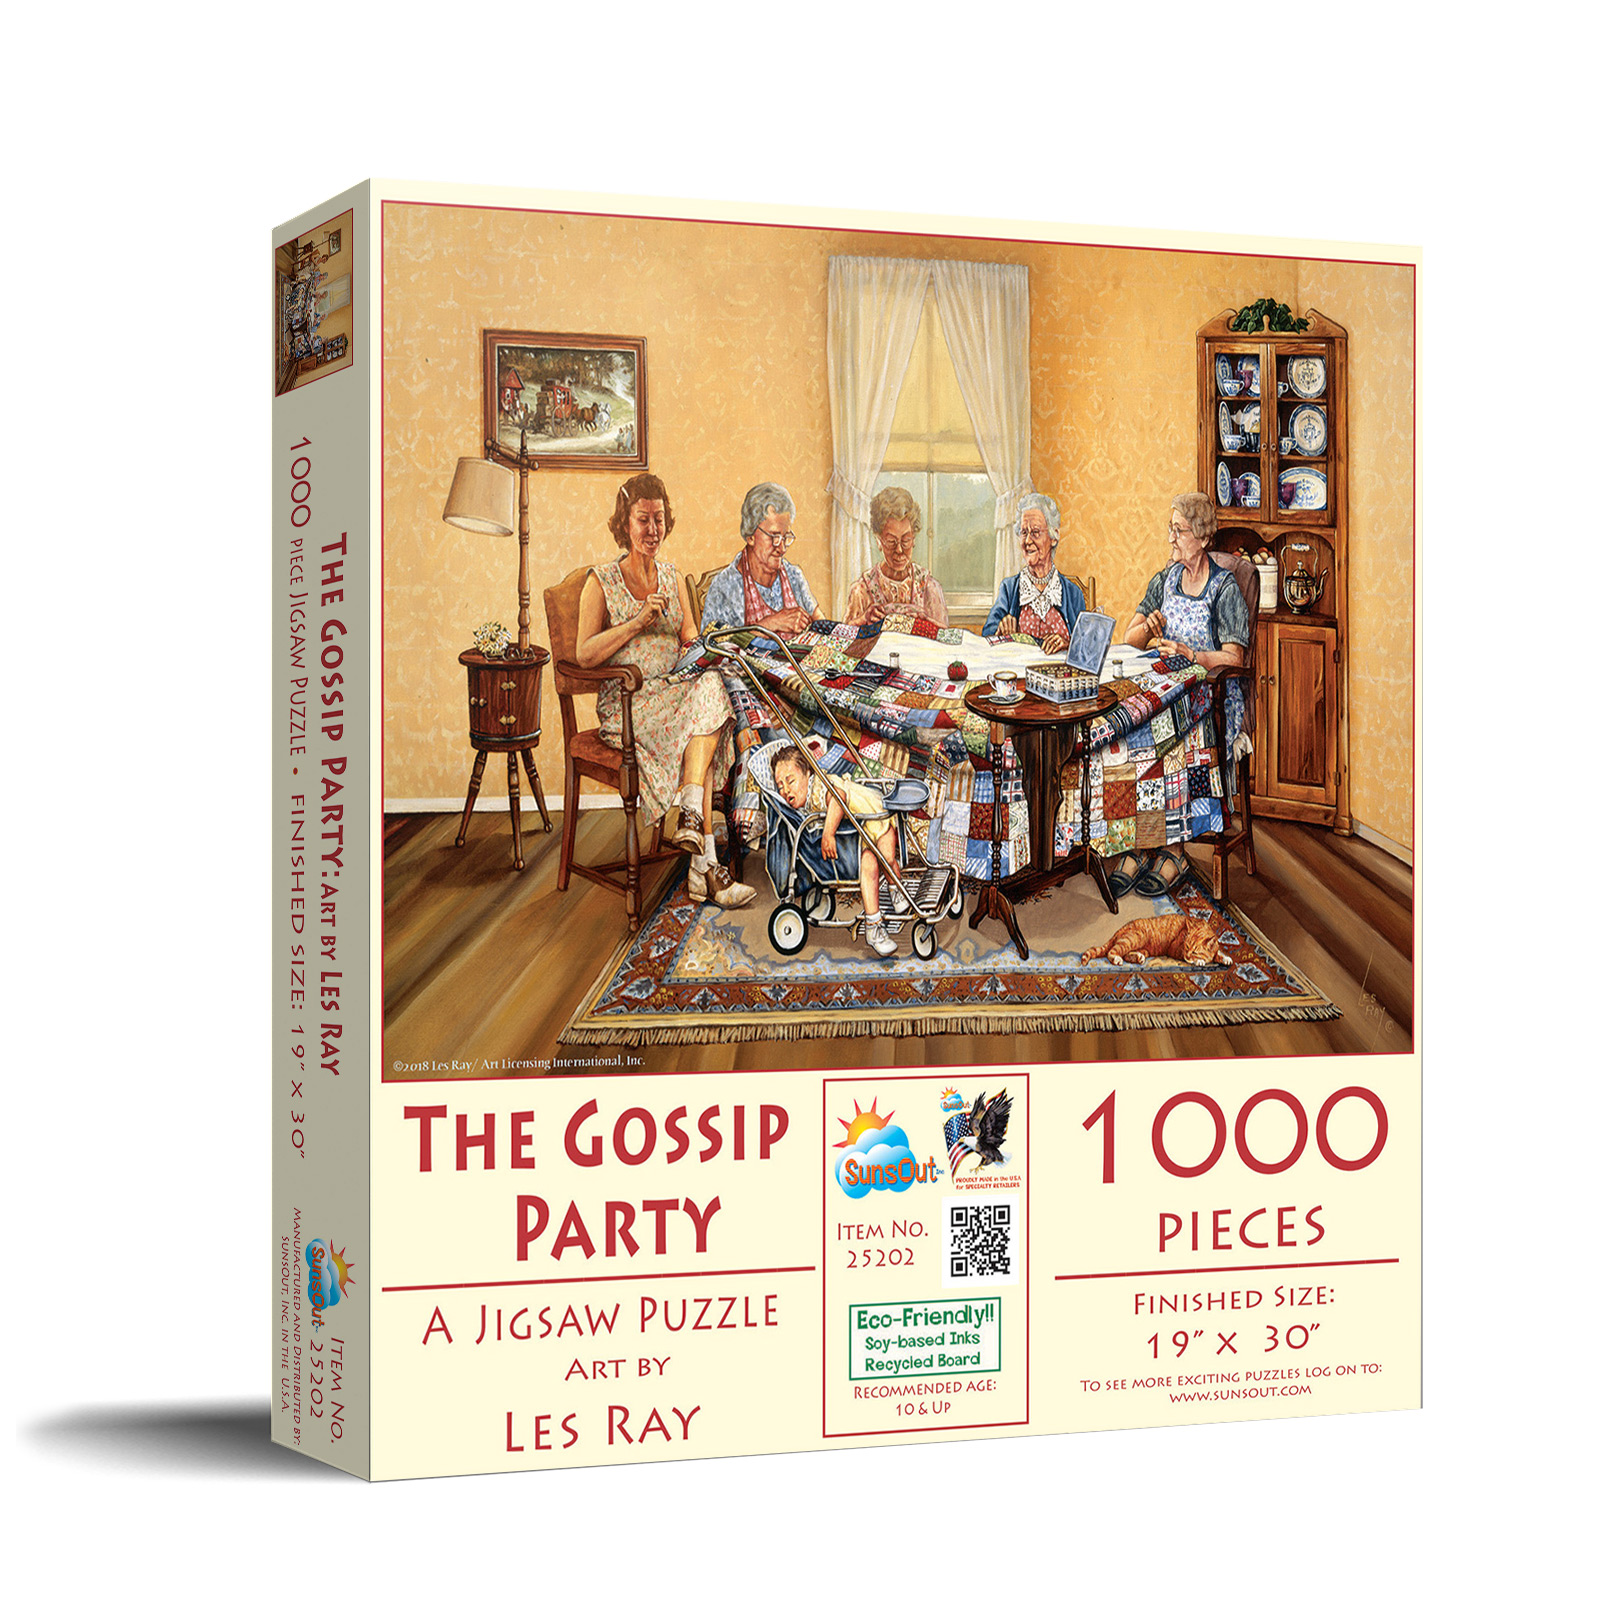 The Gossip Party